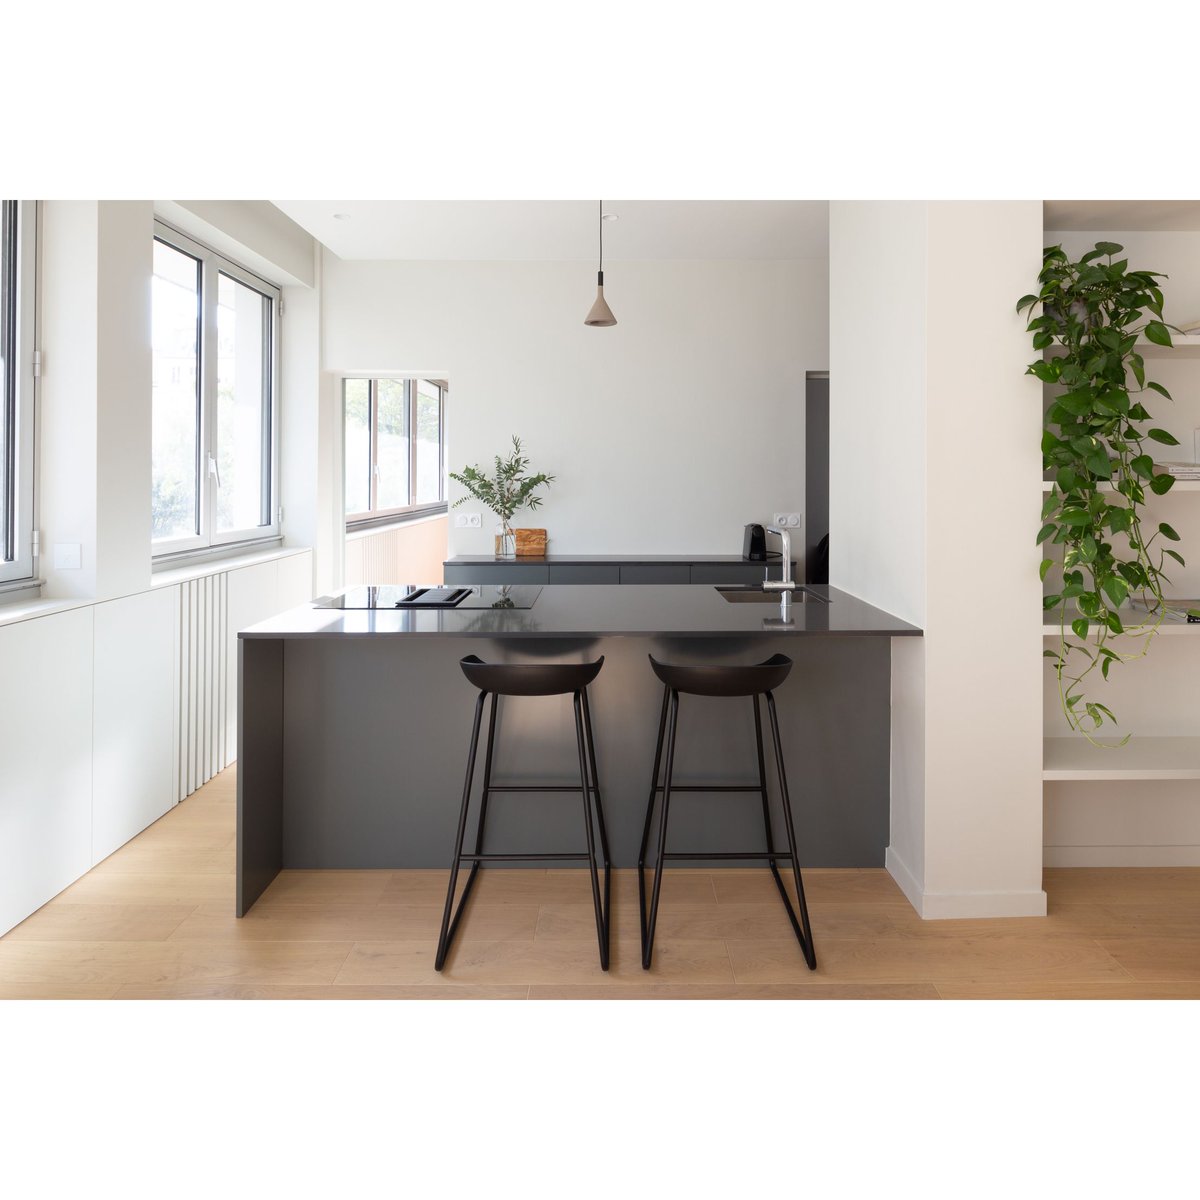 Apartamento R • R apartment
Explore this renovated Bastille apartment in Paris! Created by MASU, captured by  
@HugoHebrard. Discover the open kitchen configuration of this apartment, a layout that maximizes space and light. #Renovation #HomeDesign #OpenConcept